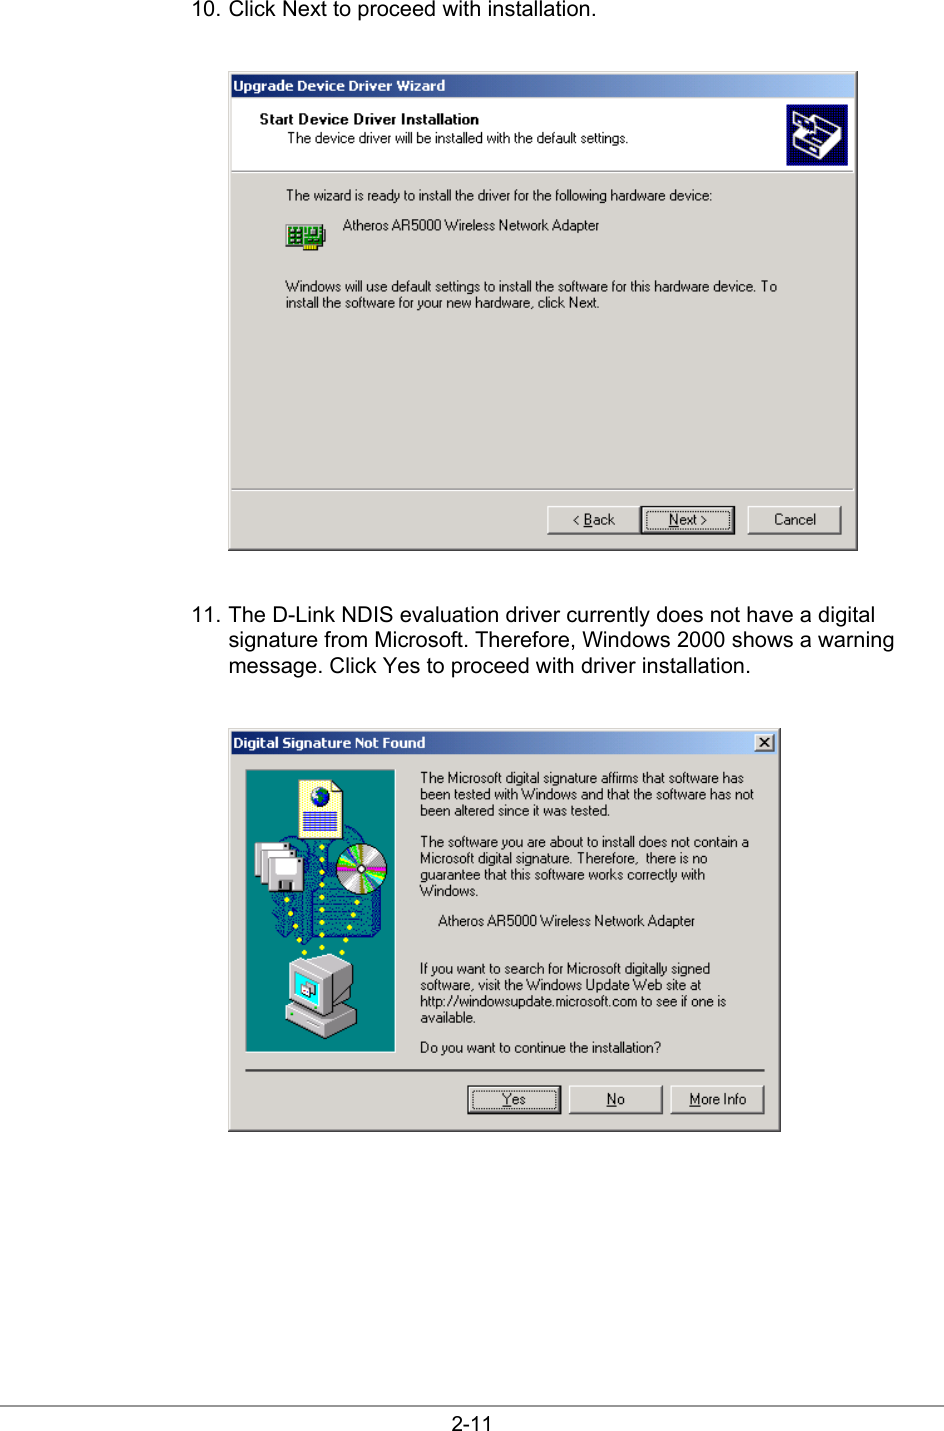  2-11 10. Click Next to proceed with installation.   11. The D-Link NDIS evaluation driver currently does not have a digital signature from Microsoft. Therefore, Windows 2000 shows a warning message. Click Yes to proceed with driver installation.   